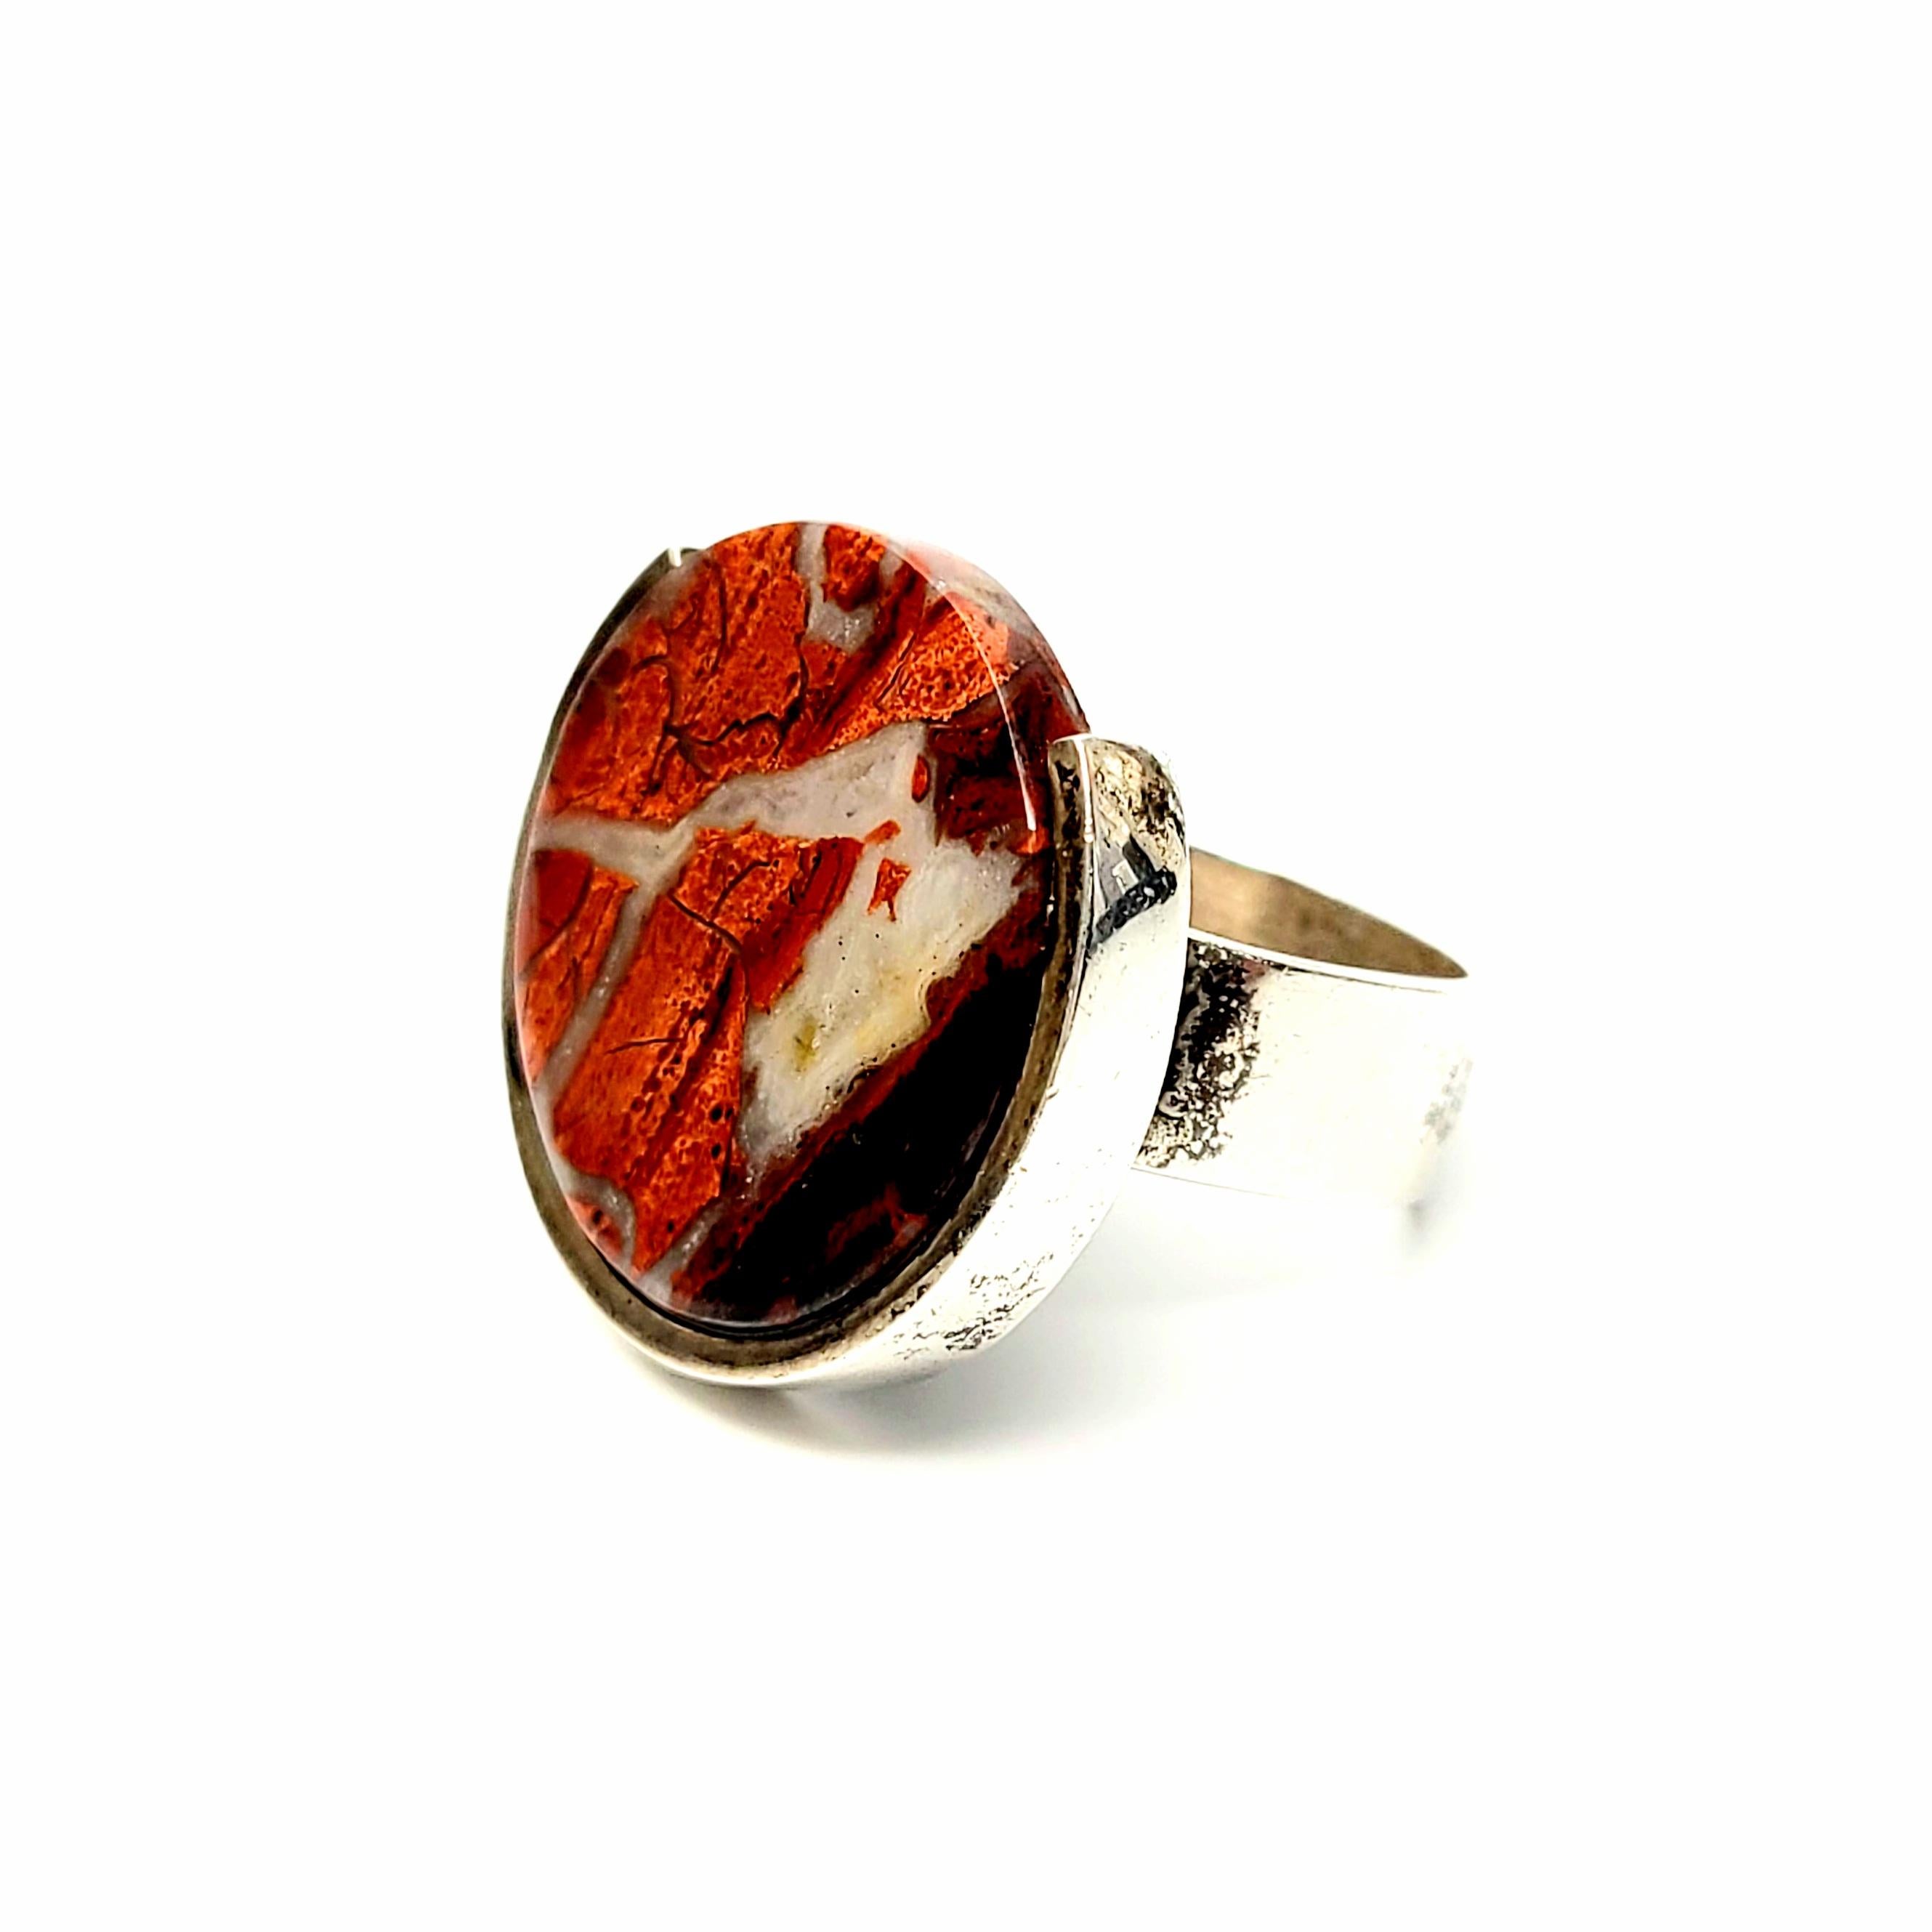 Sterling silver and red jasper modernist ring by American Studio Fingem.

Size 8 1/2

This ring features a large Red Jasper disc with beautiful veining. The band shape is a rounded corner square.

Measurements: 3/4